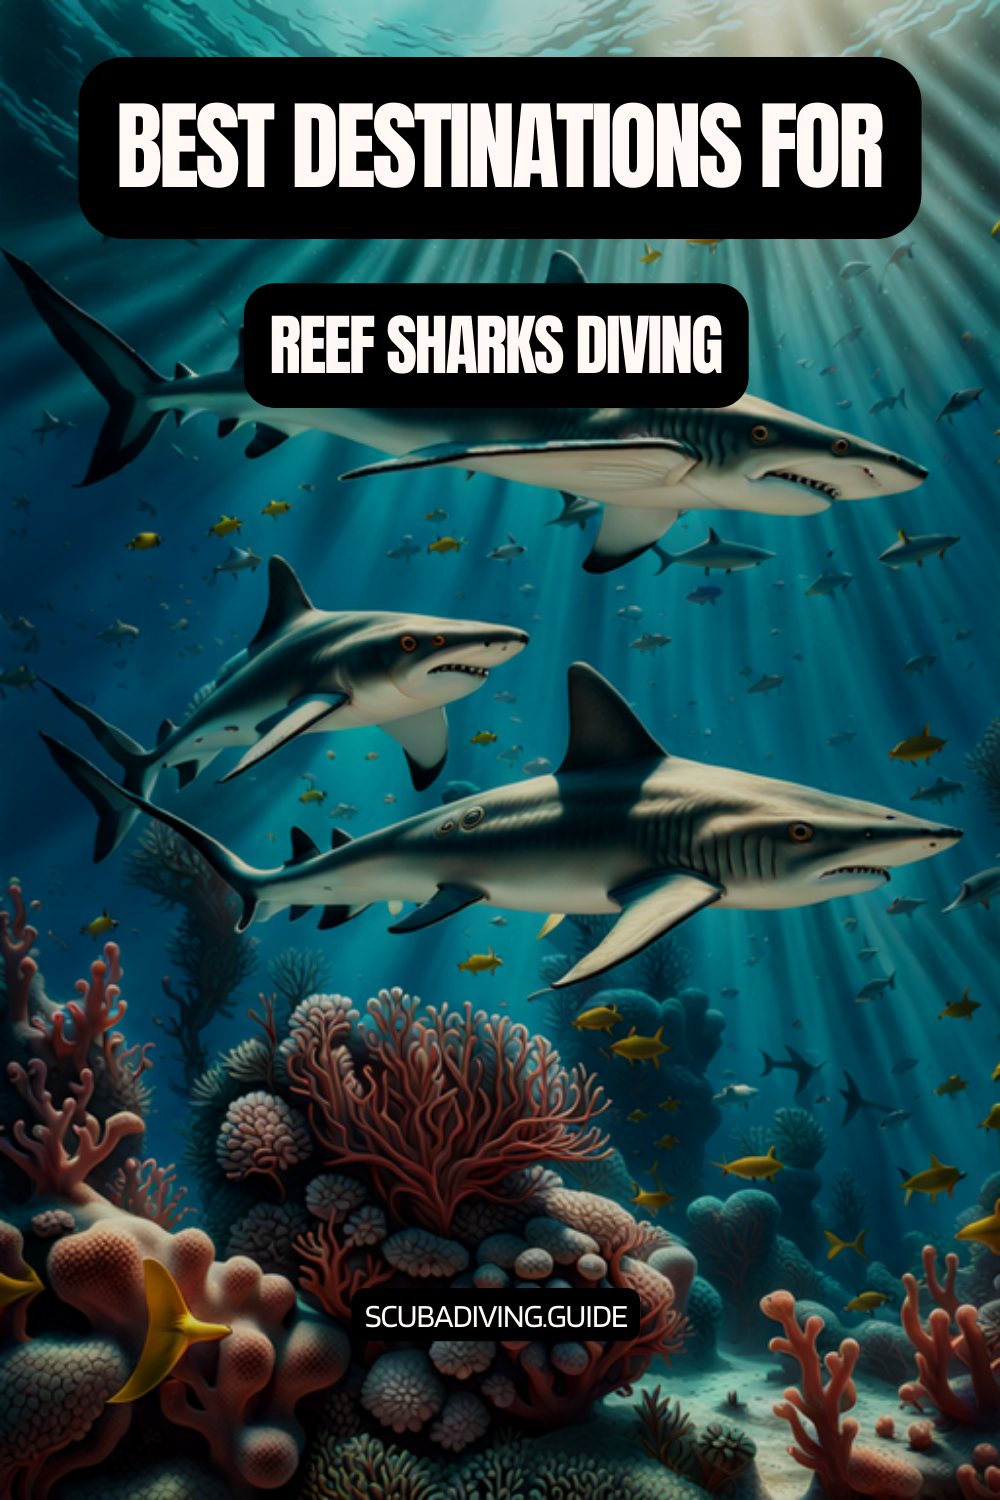 Best Destinations for Diving with Reef Sharks